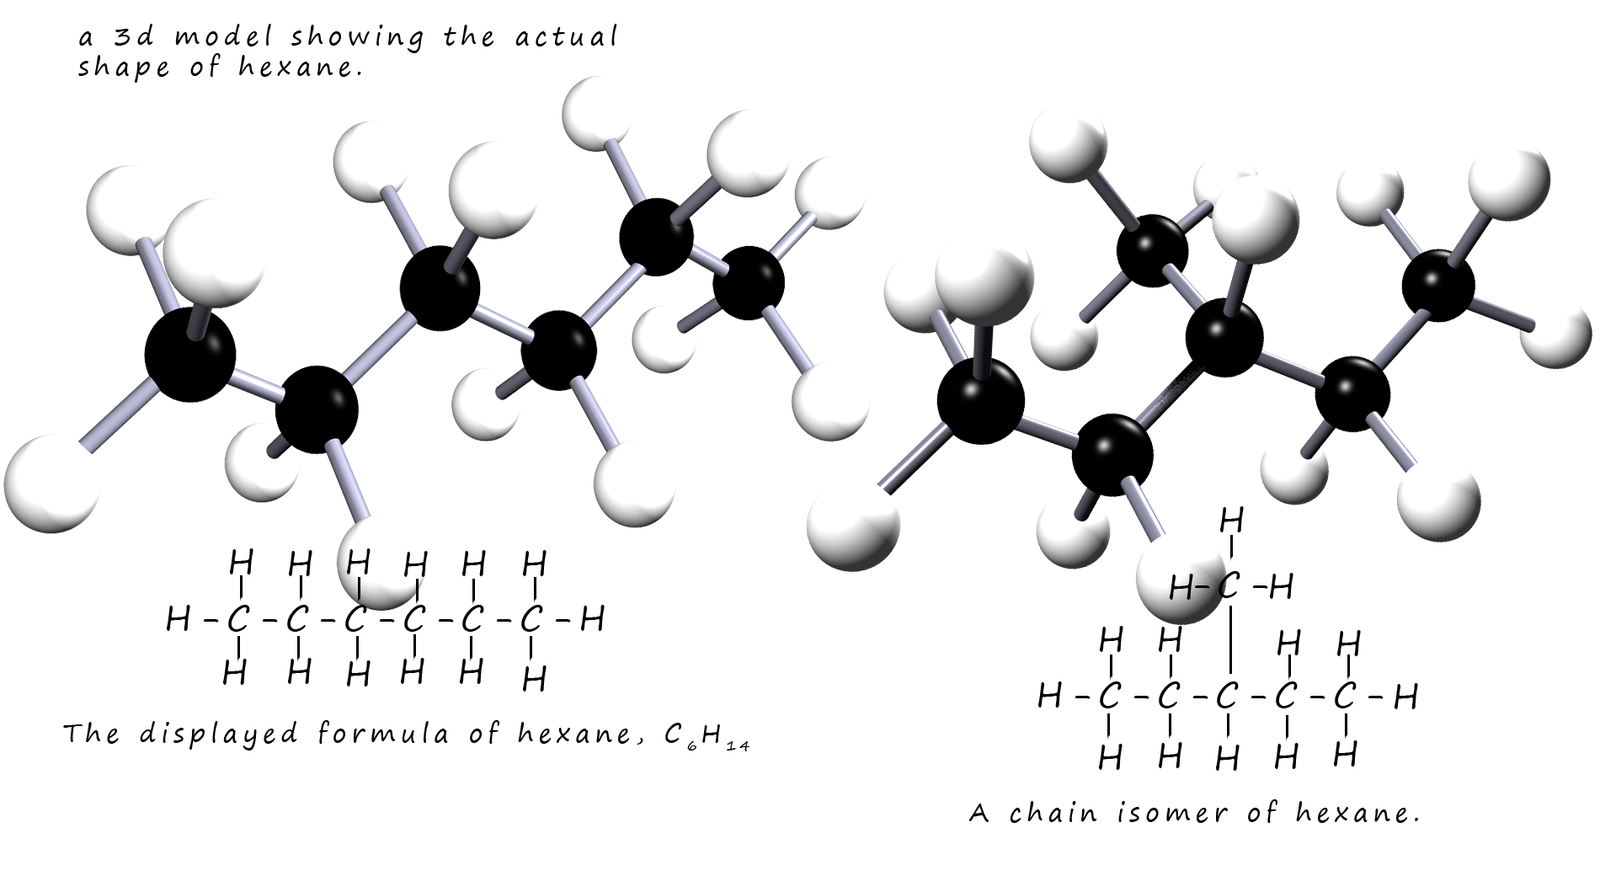 3D models showing structural isomers of hexane.